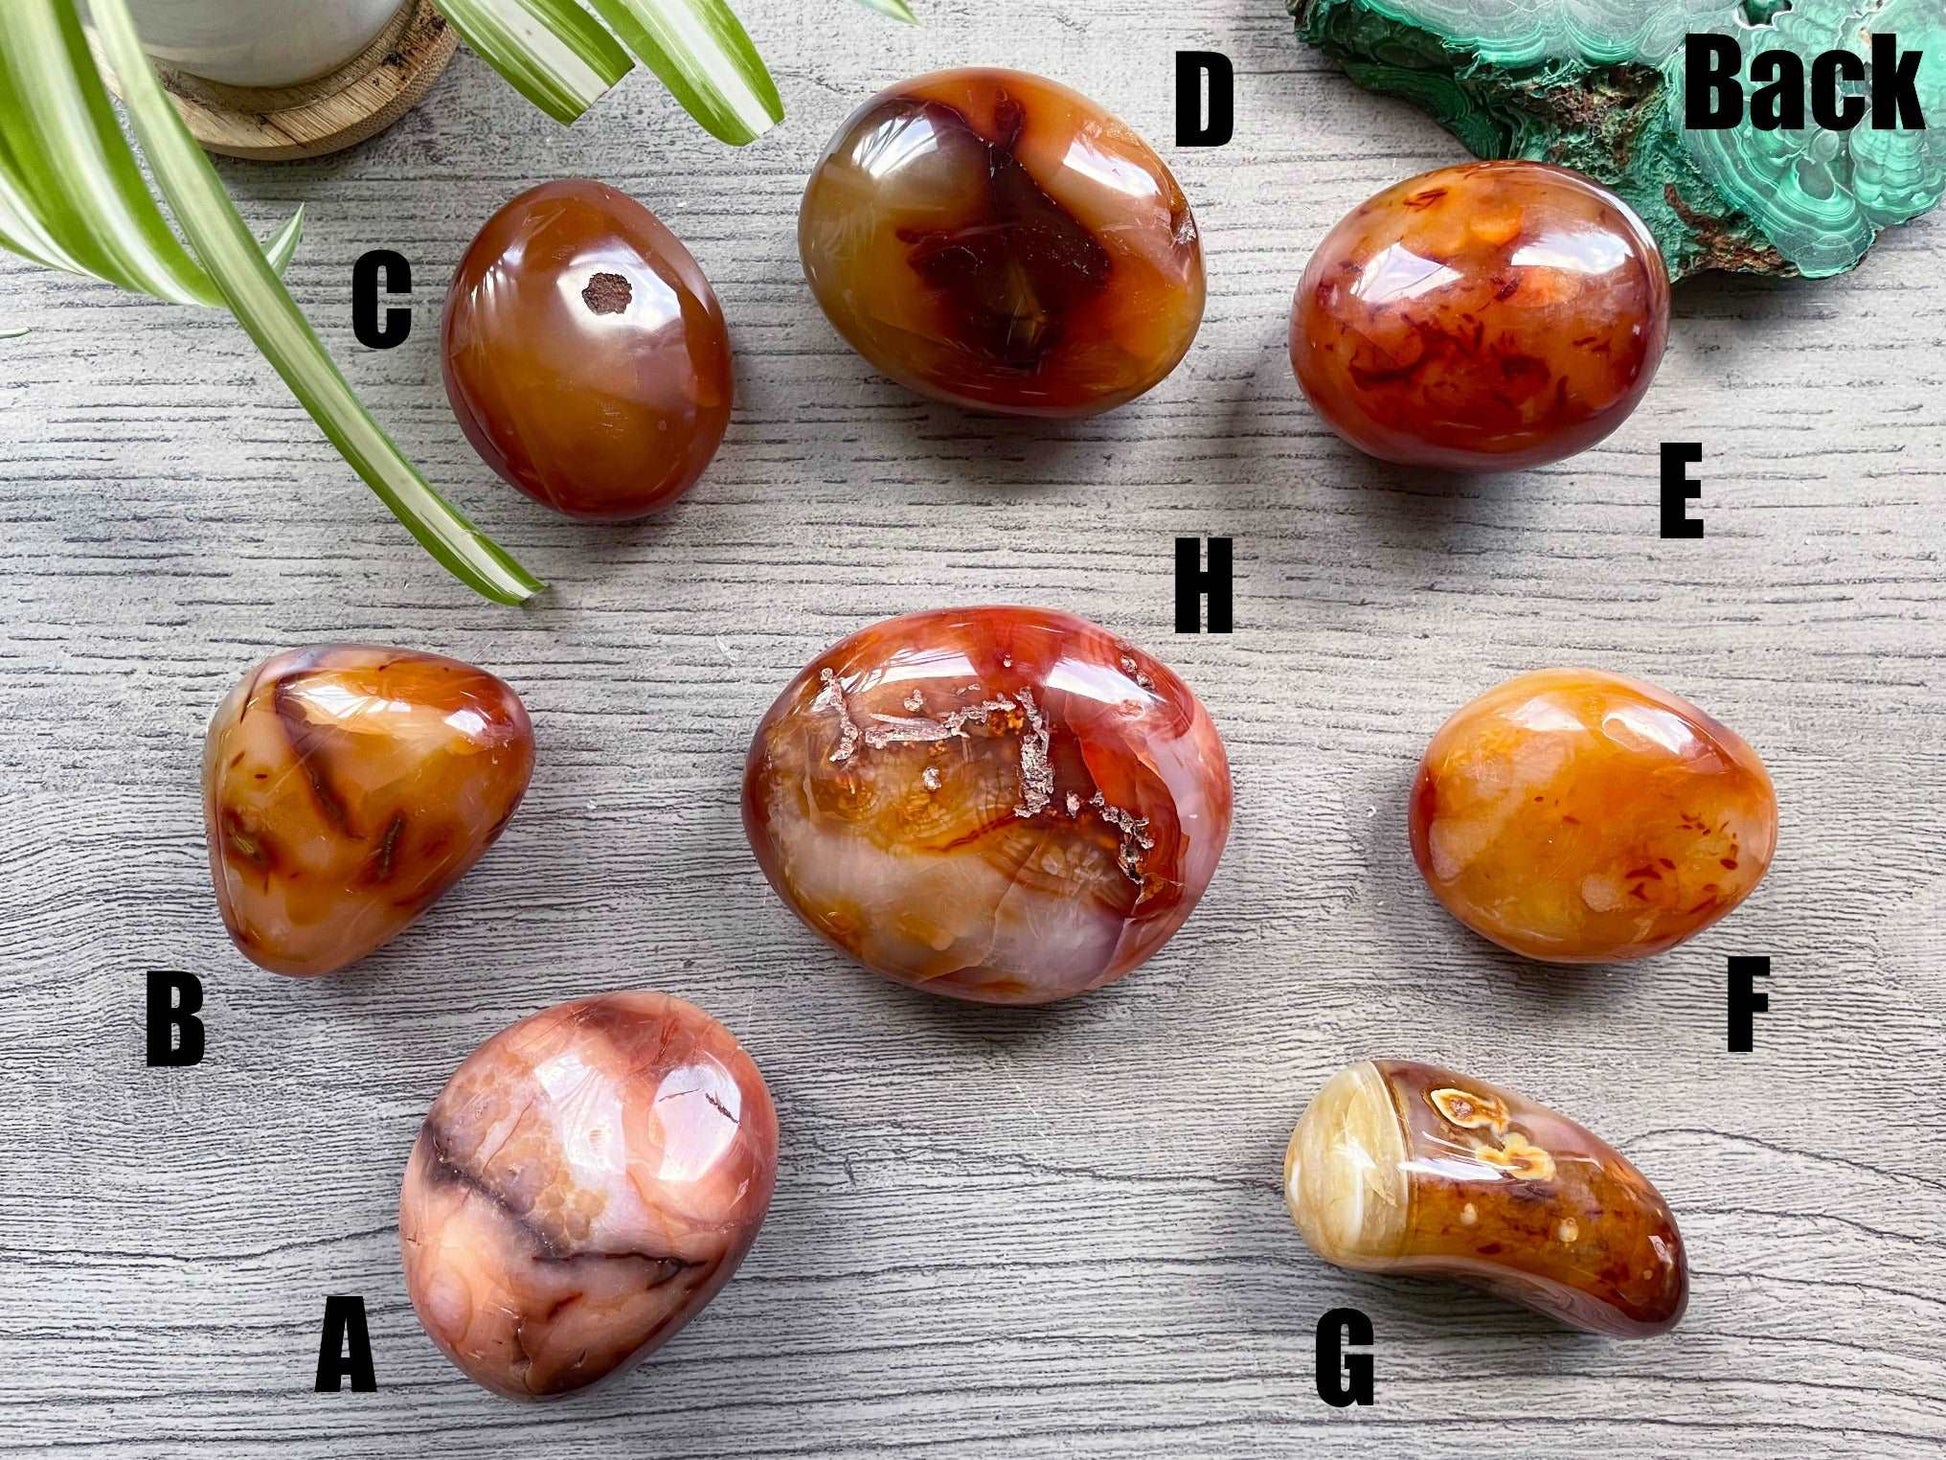 Pictured are various polished carnelian palm stones.